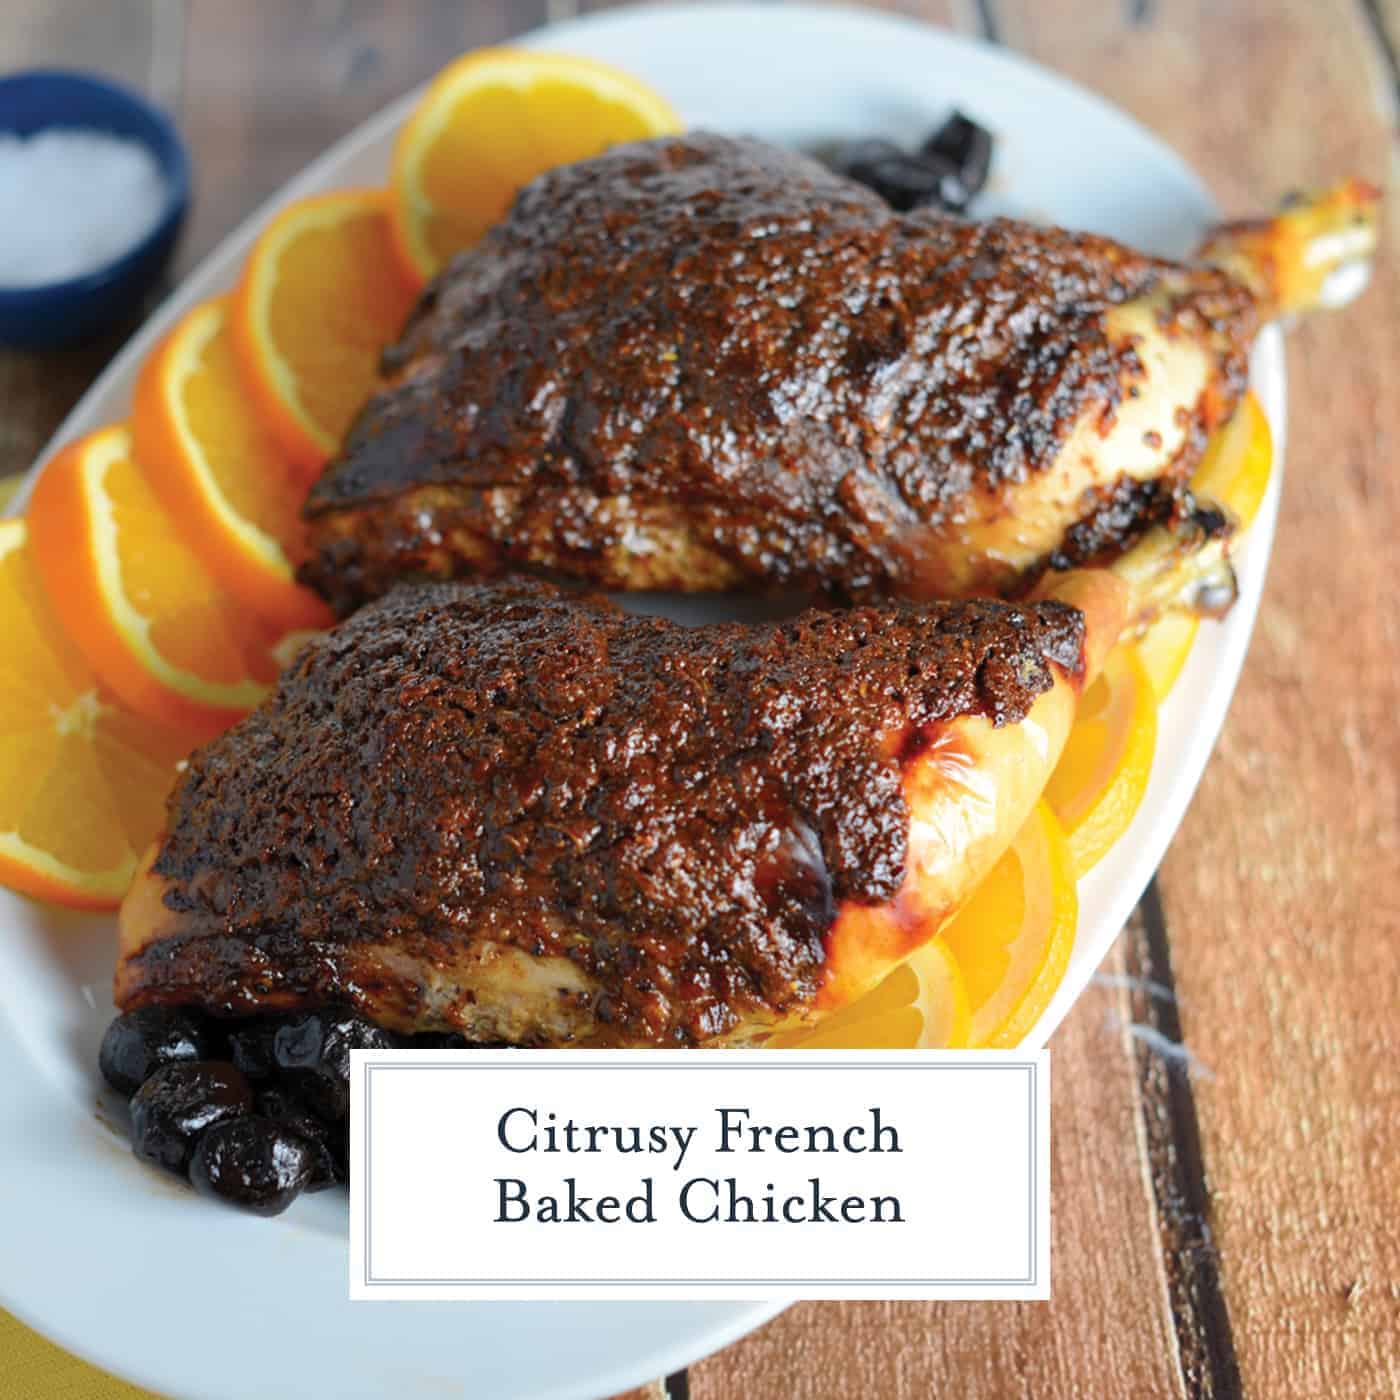 Orange Marmalade with orange, tarragon and olives make this delicious, sticky crust for French Baked Chicken. Use on chicken halves or chicken breasts for a delicious French dinner recipe. #frenchchicken #bakedchickenrecipe www.savoryexperiments.com 